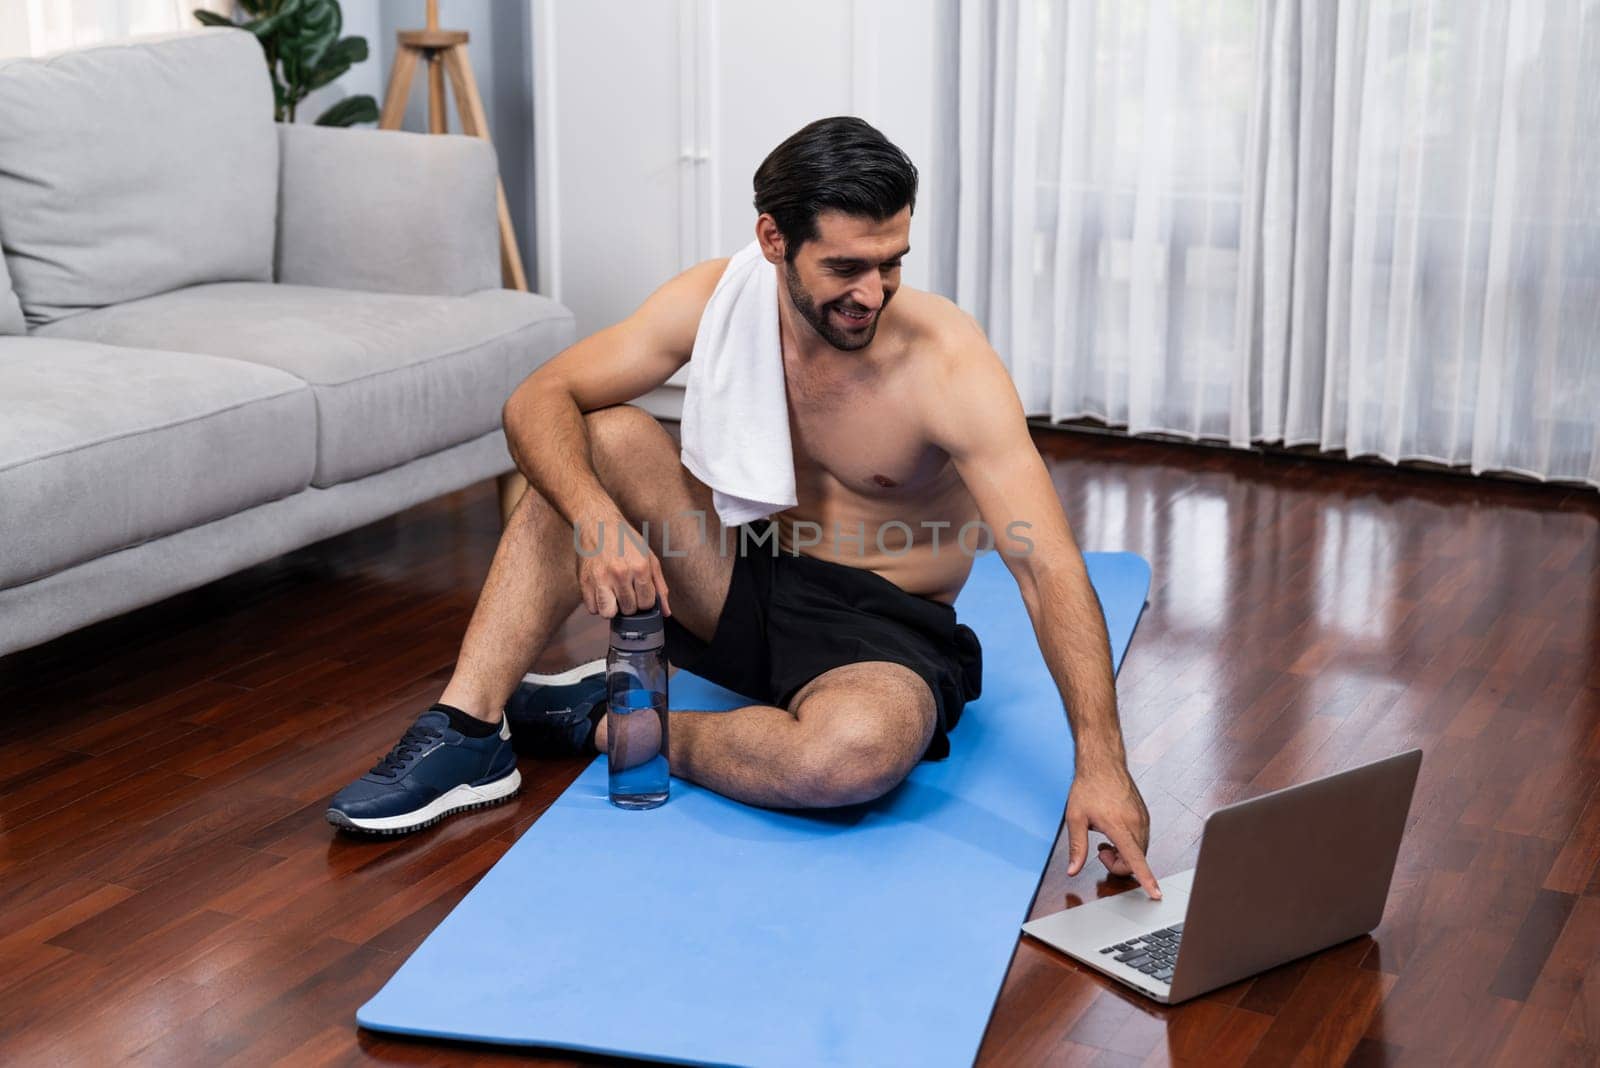 Athletic and sporty man resting on fitness mat during online body workout exercise session for fit physique and healthy sport lifestyle at home. Gaiety home exercise workout training concept.